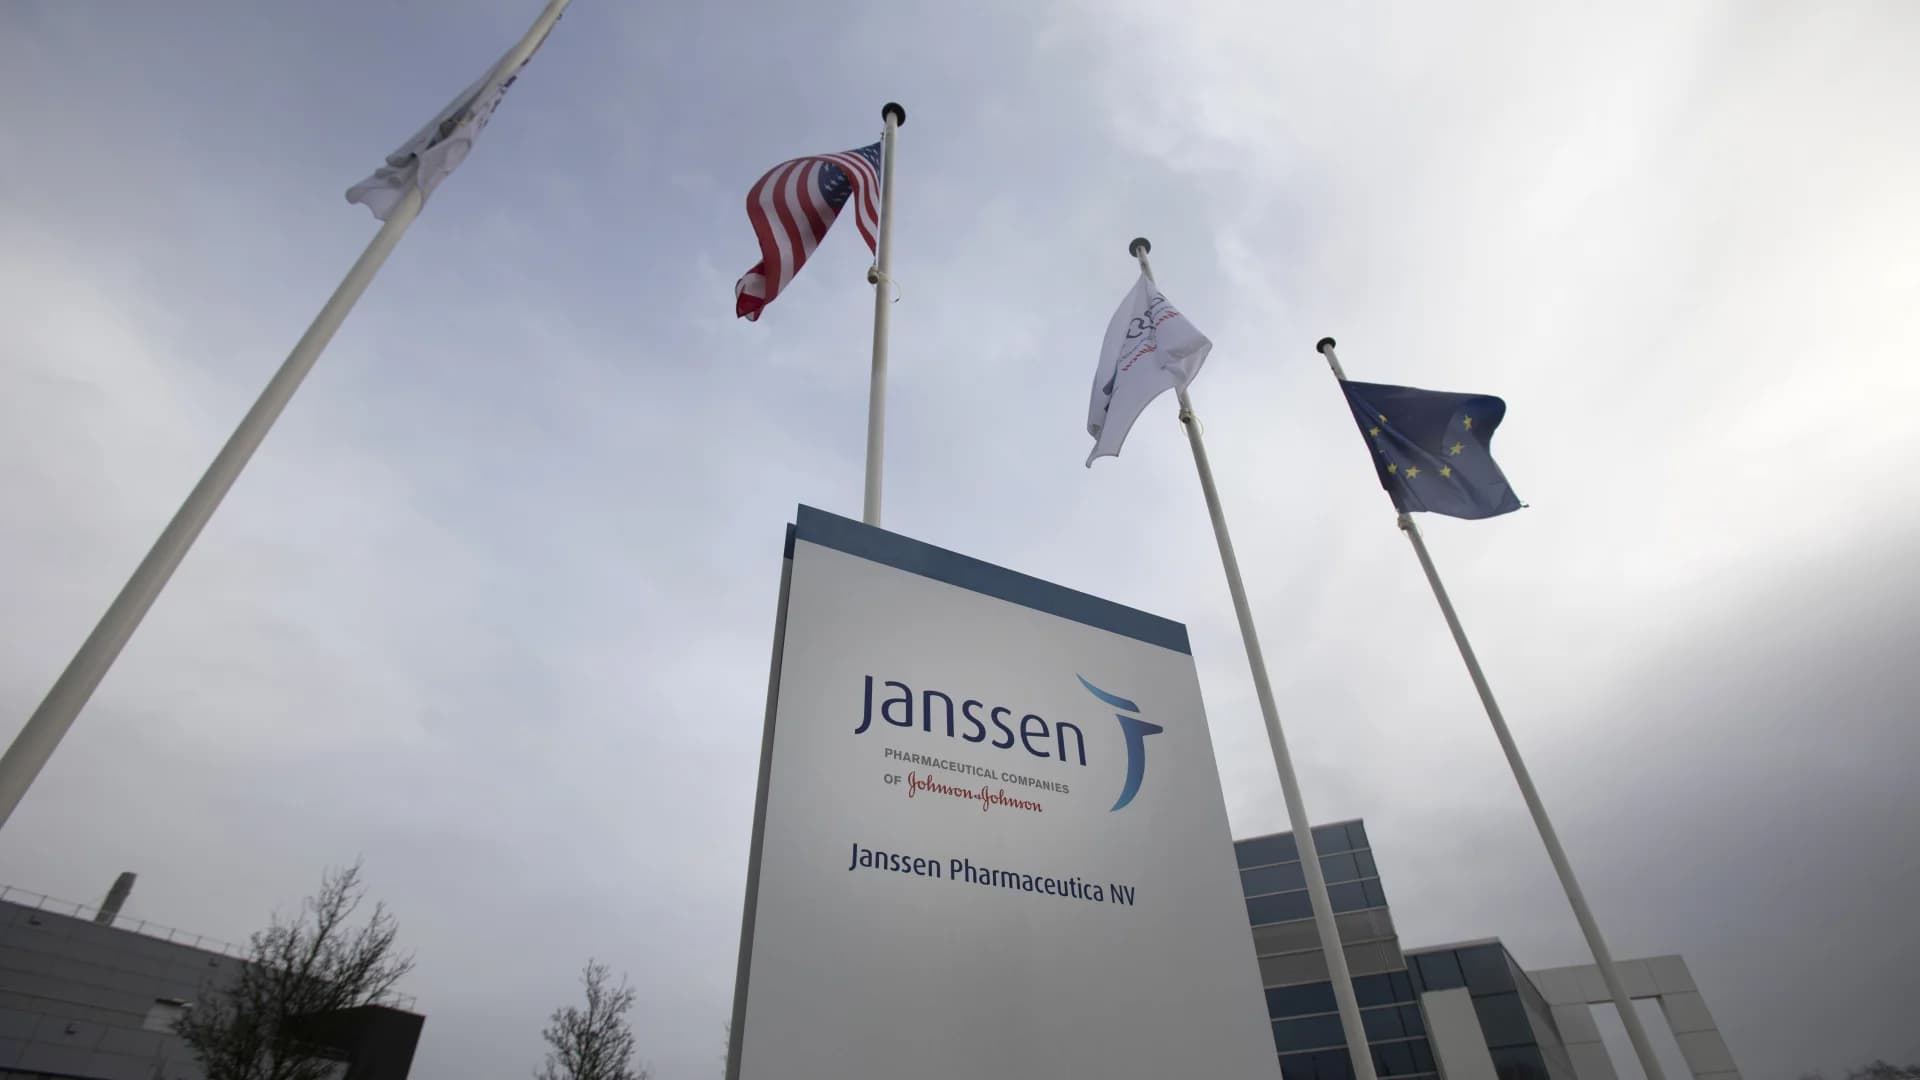 J&J says it will be able to provide 20 million US doses of its COVID-19 vaccine by end of March